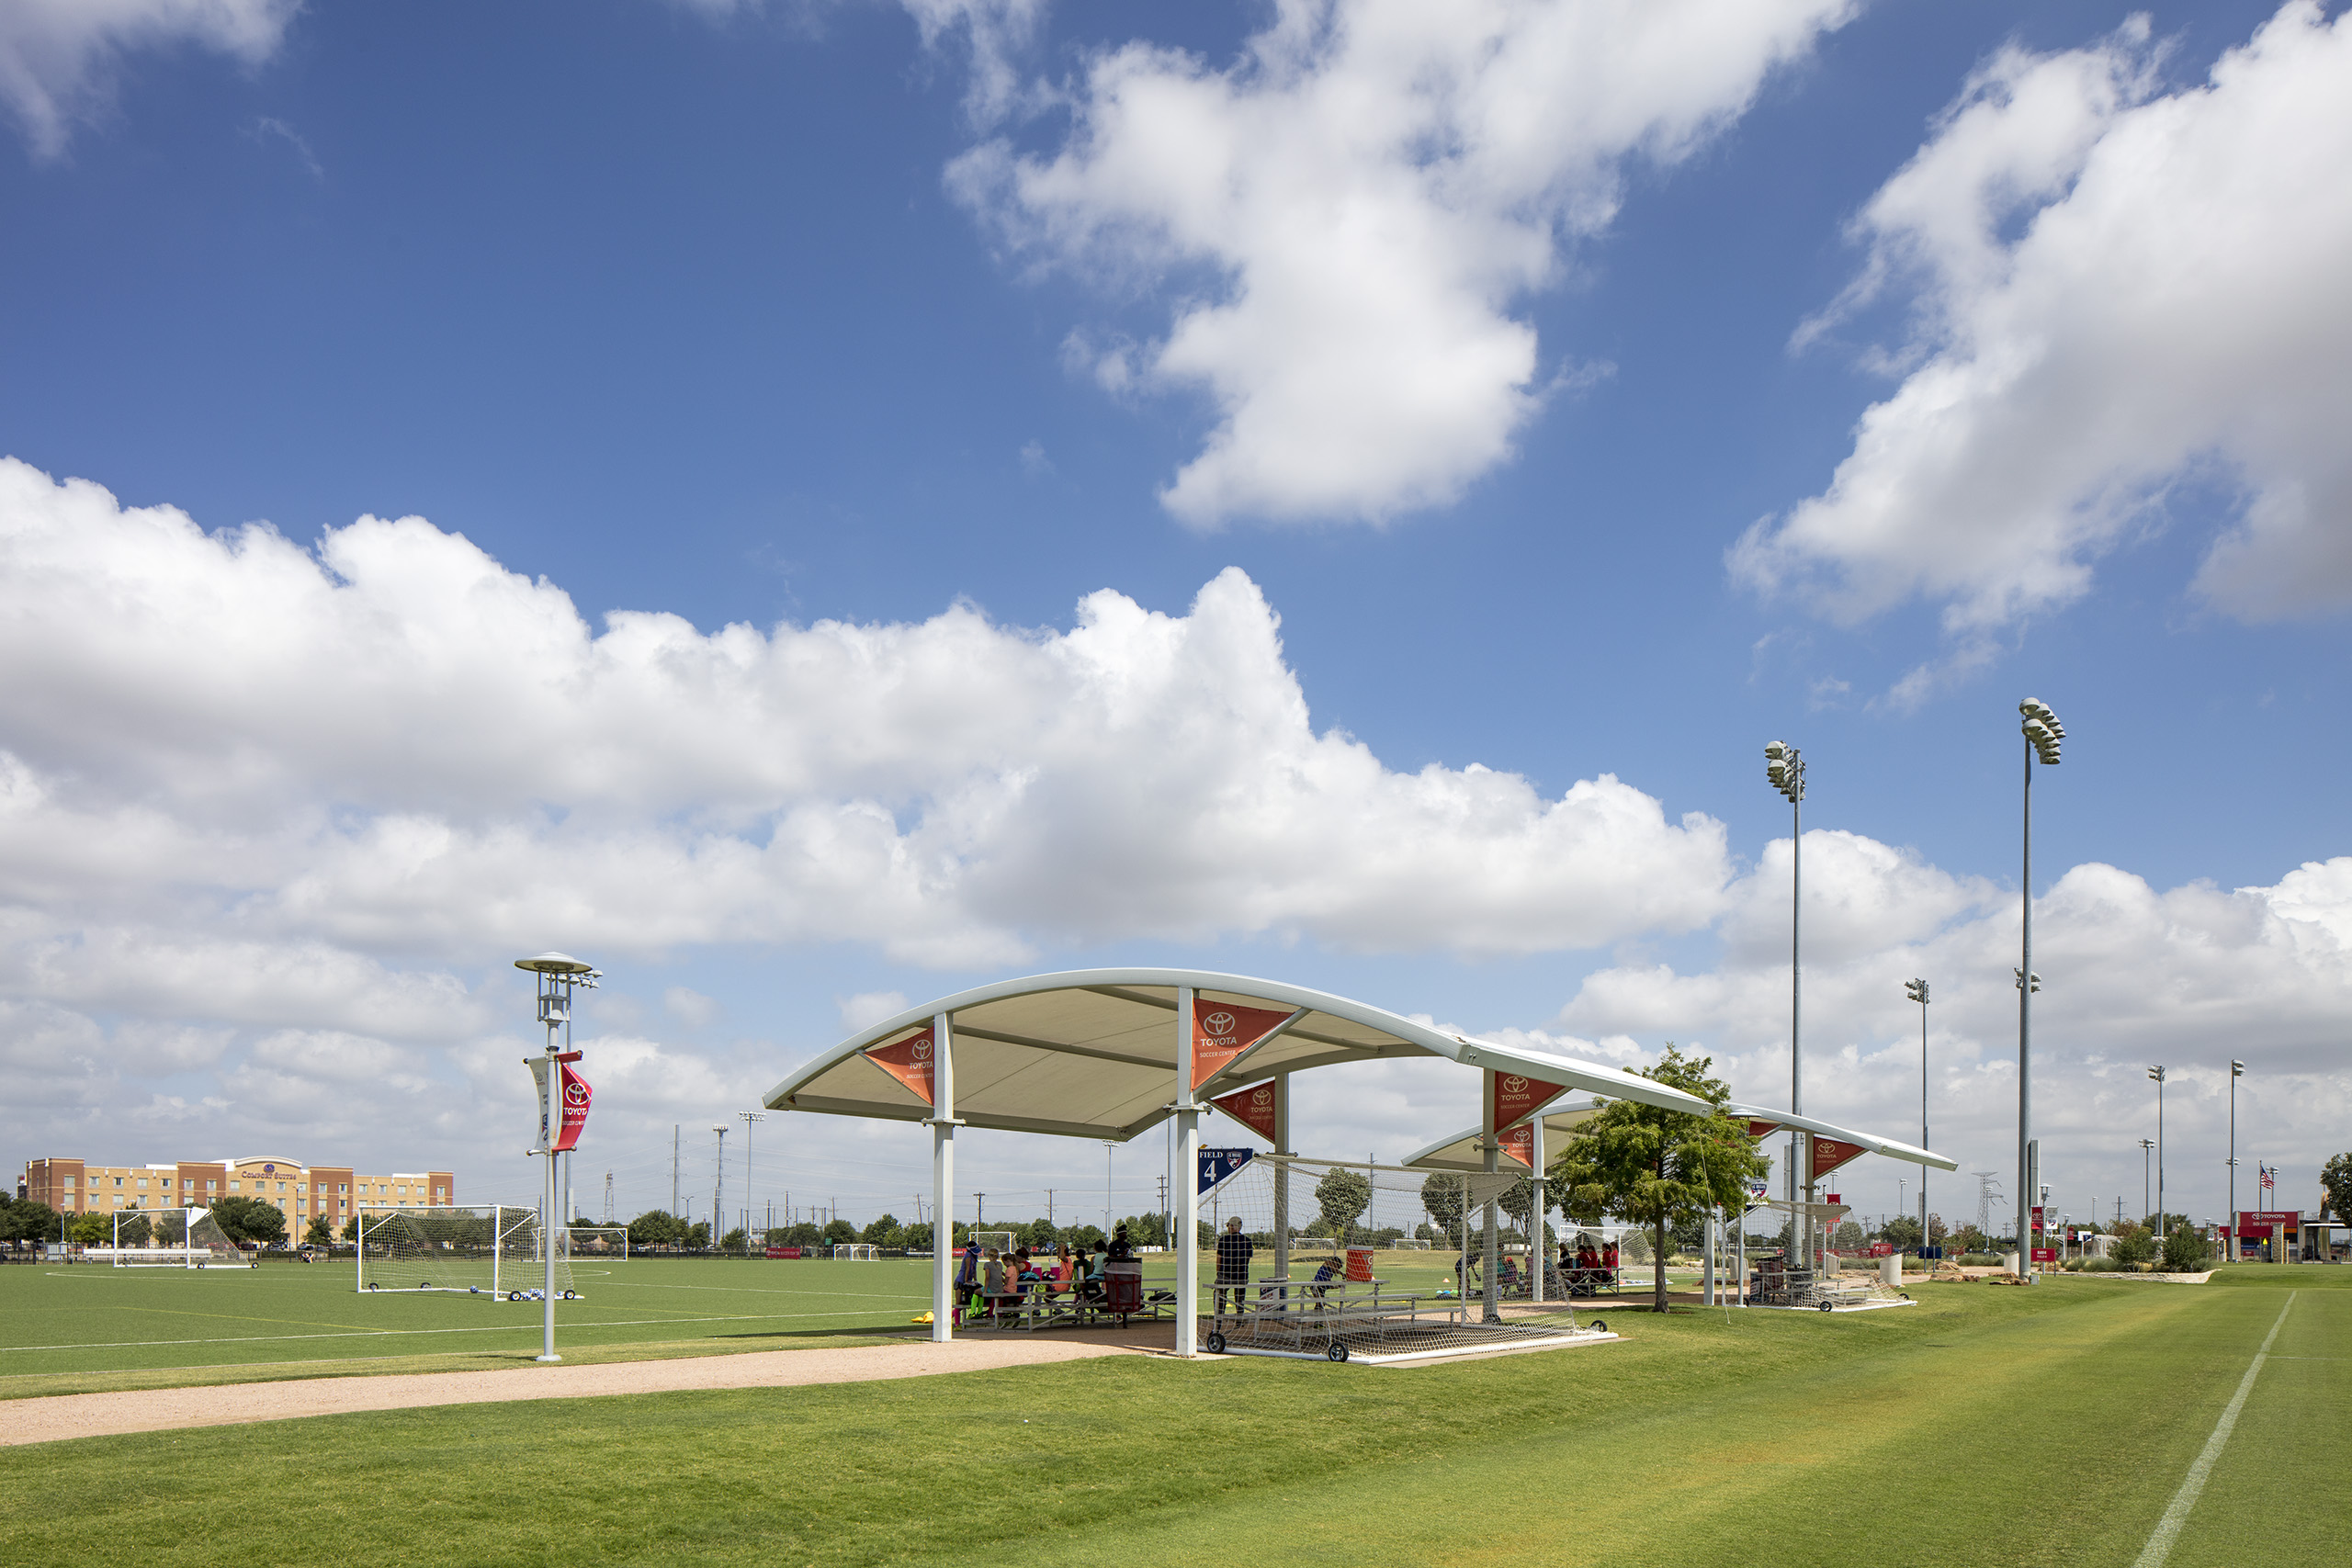 soccer field with usa shades covering seating area